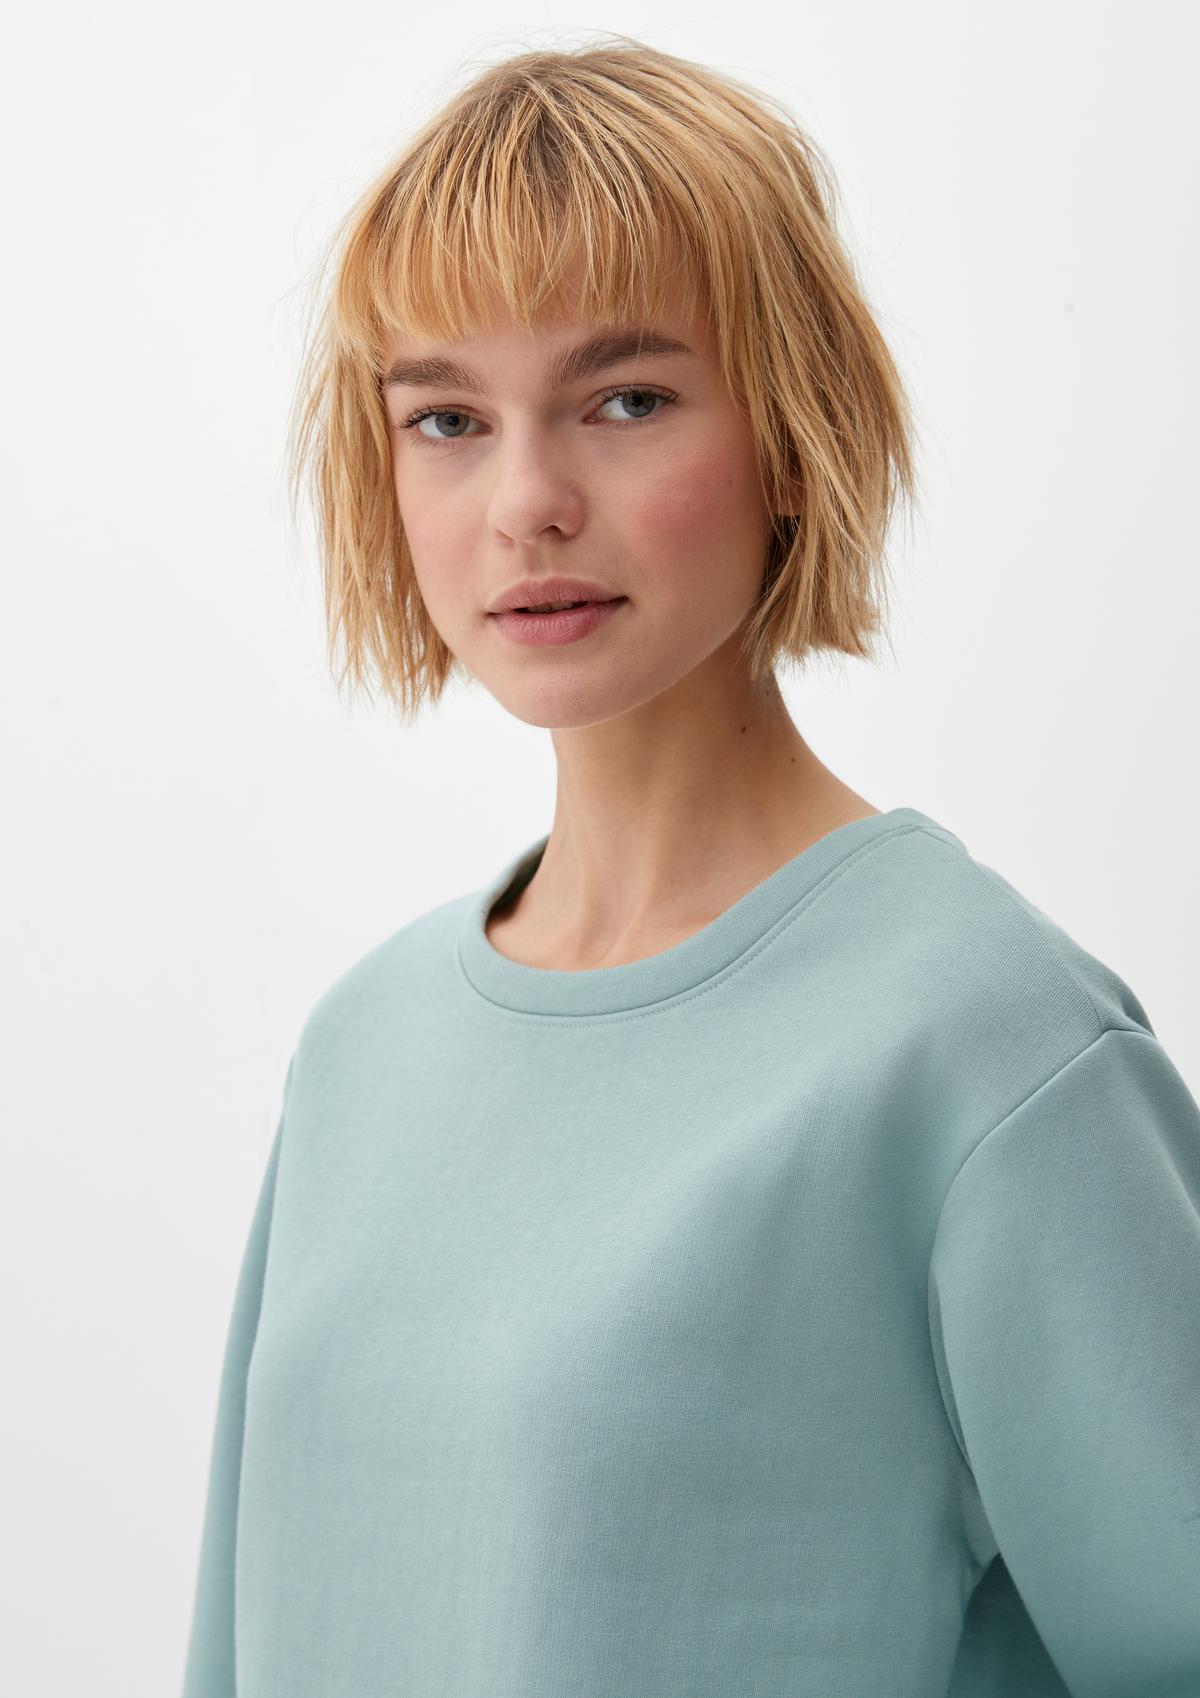 s.Oliver Sweatshirt with a rounded hem